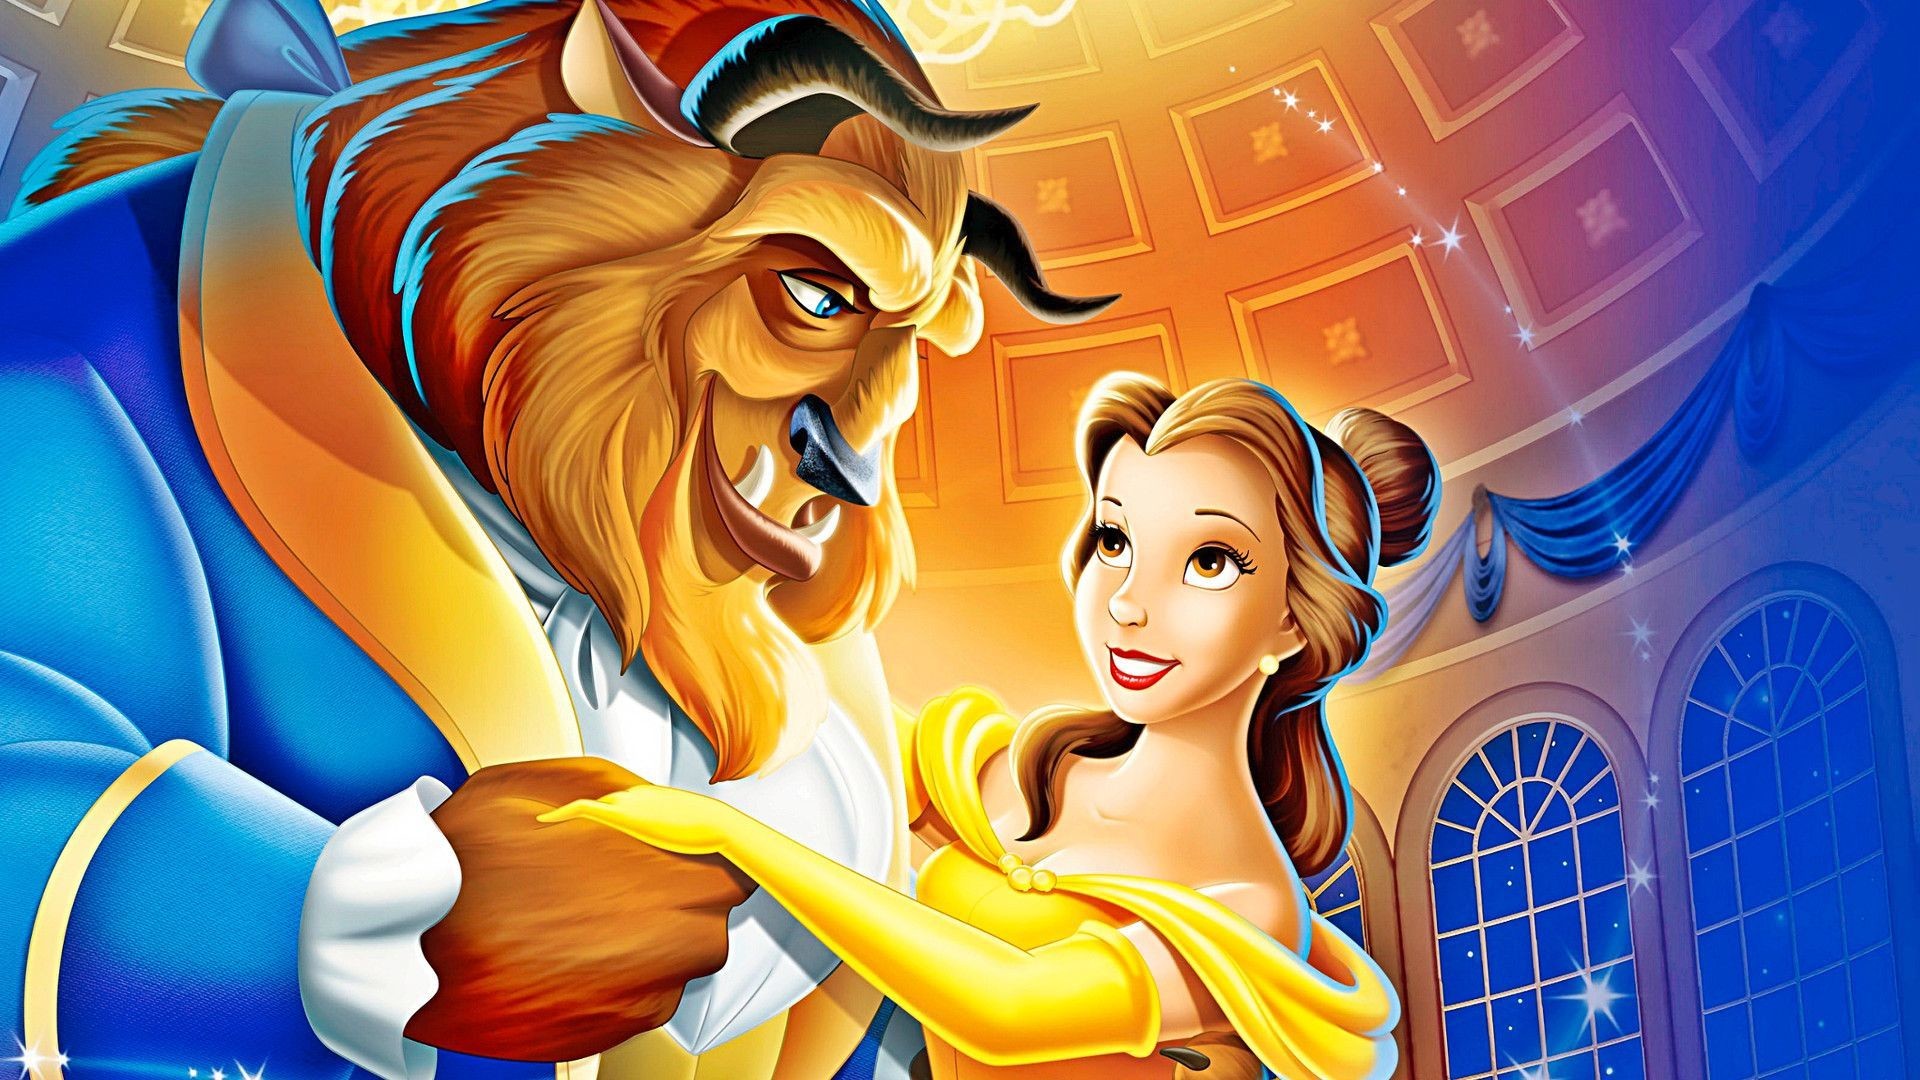 Beauty And The Beast Wallpaper 79 Images